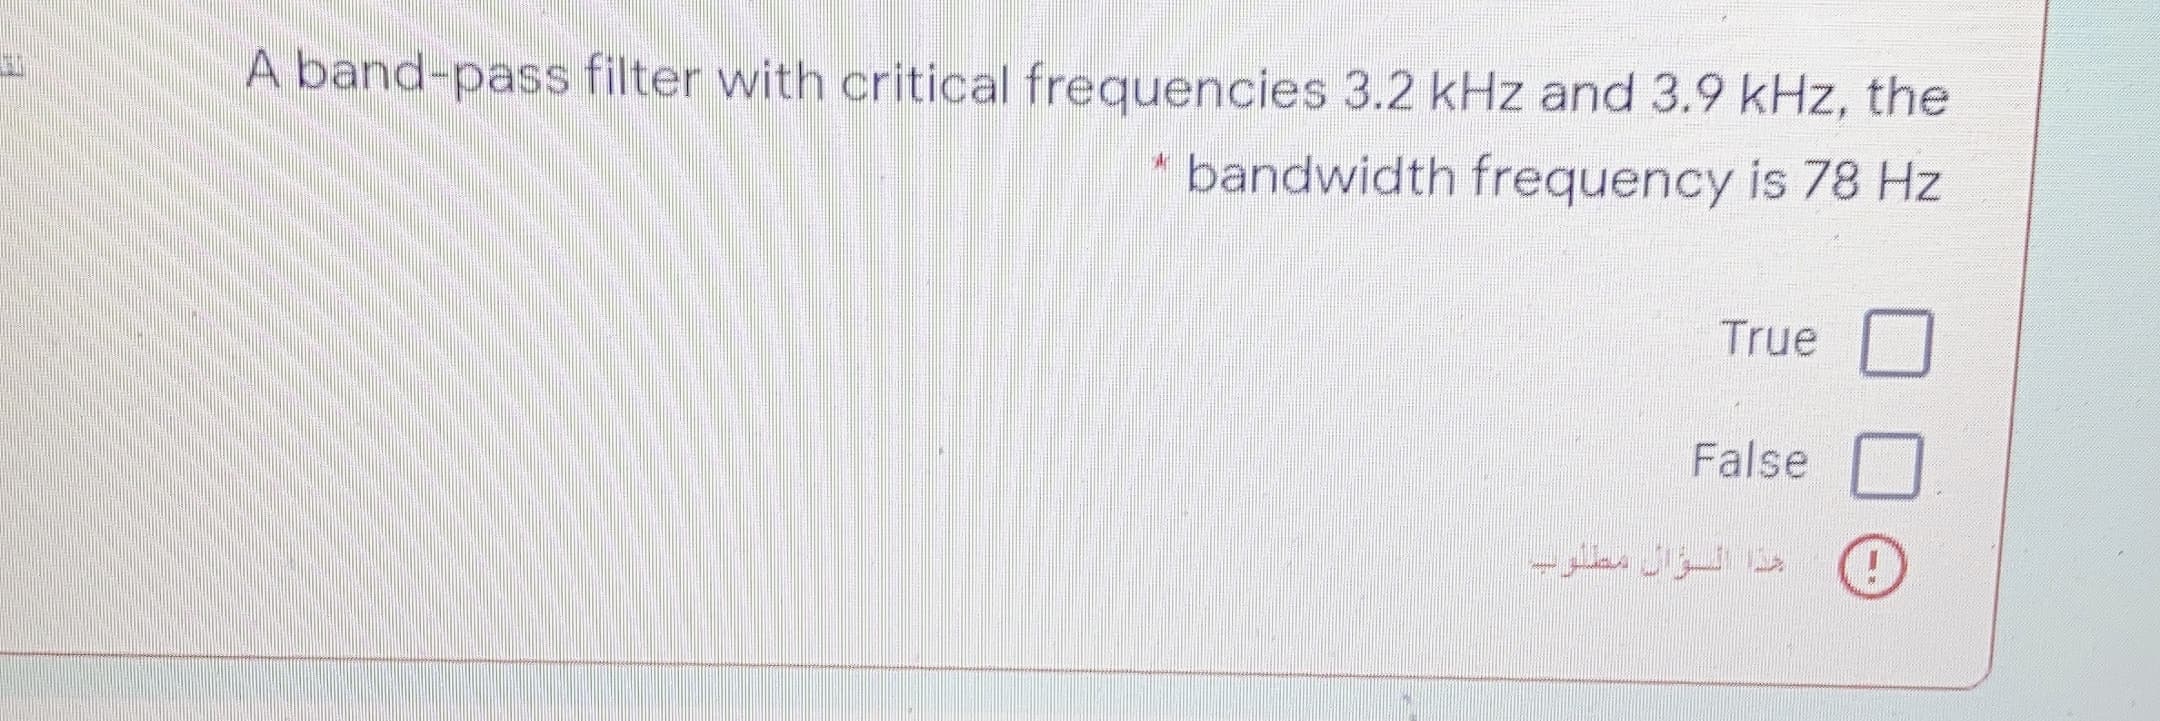 A band-pass filter with critical frequencies 3.2 kHz and 3.9 kHz, the
bandwidth frequency is 78 Hz
True
False
